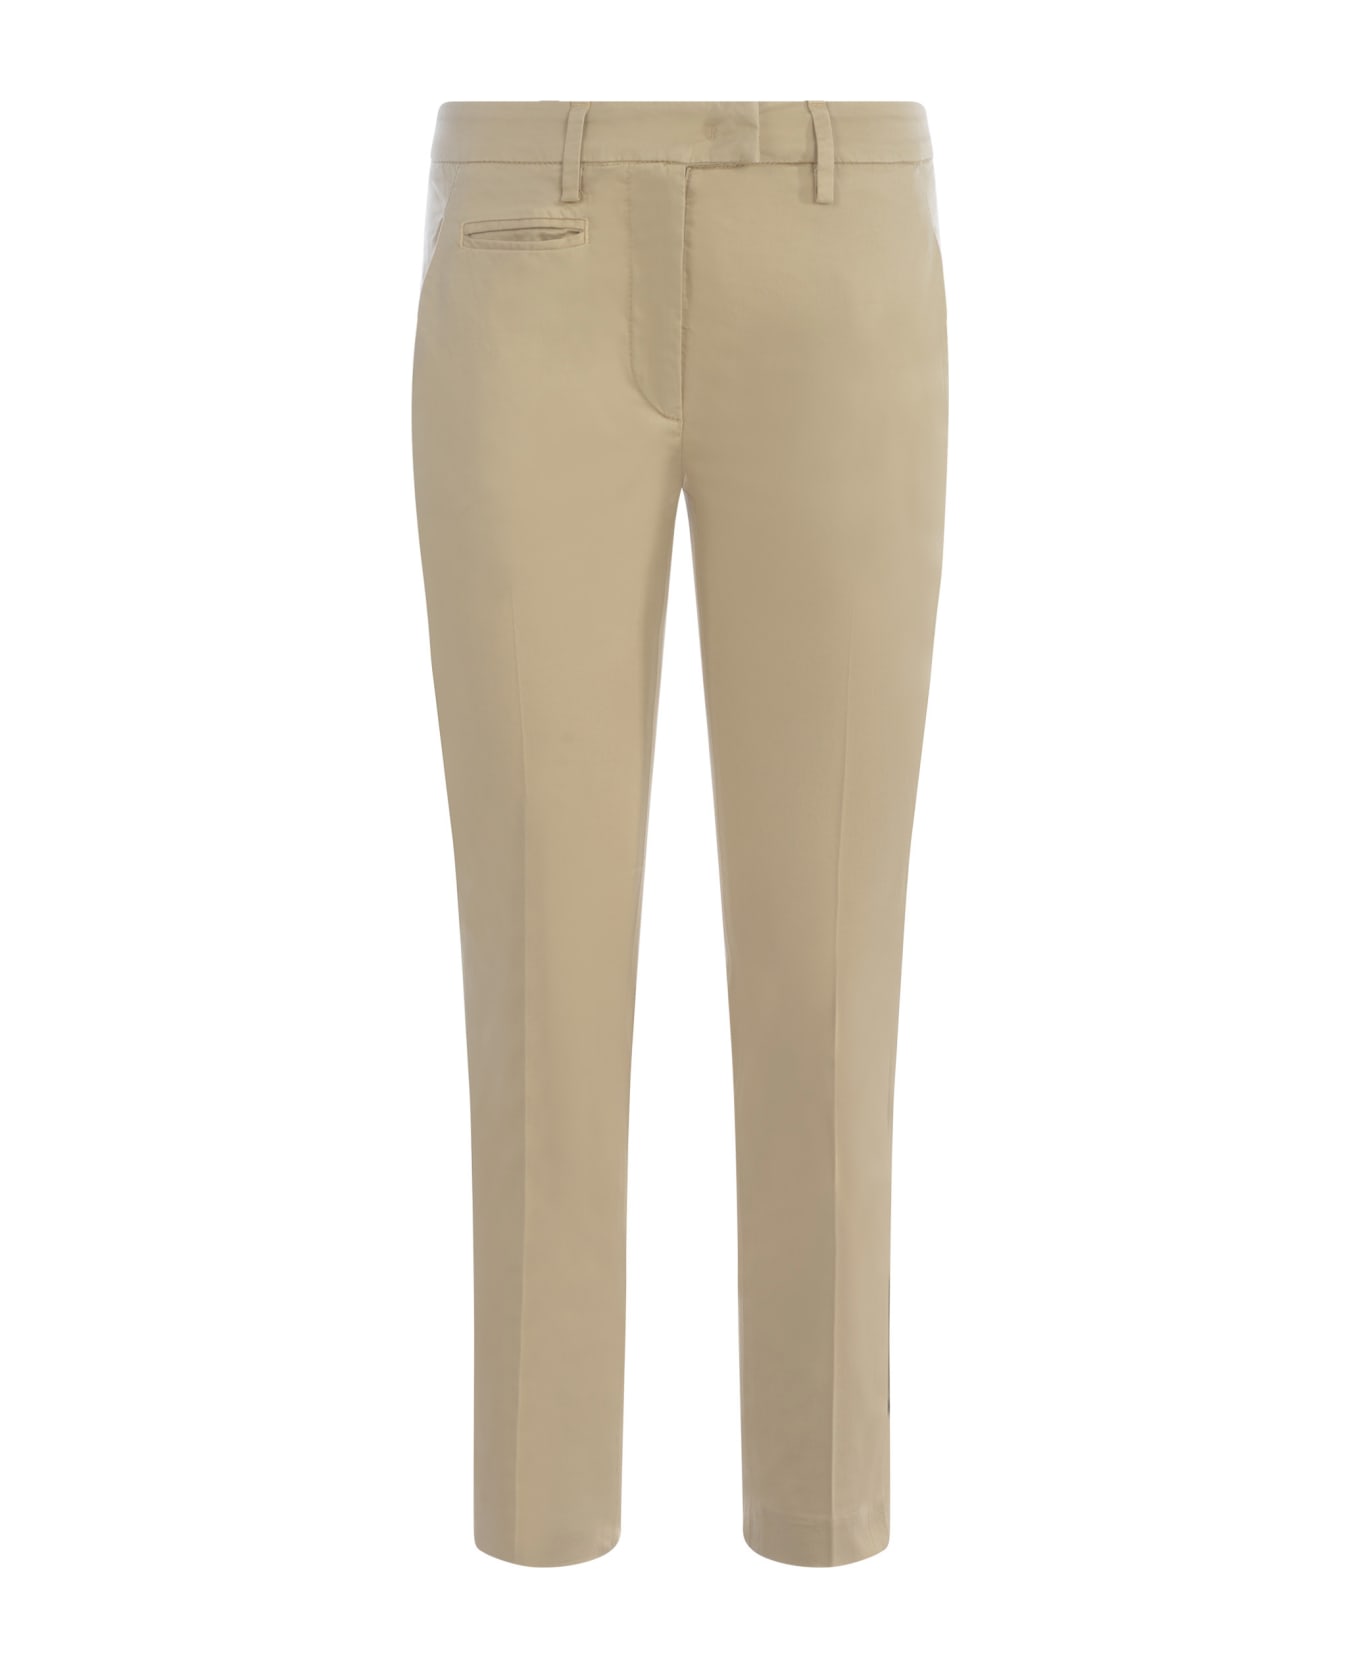 Dondup Trousers Dondup "perfect" In Stretch Cotton - Beige ボトムス